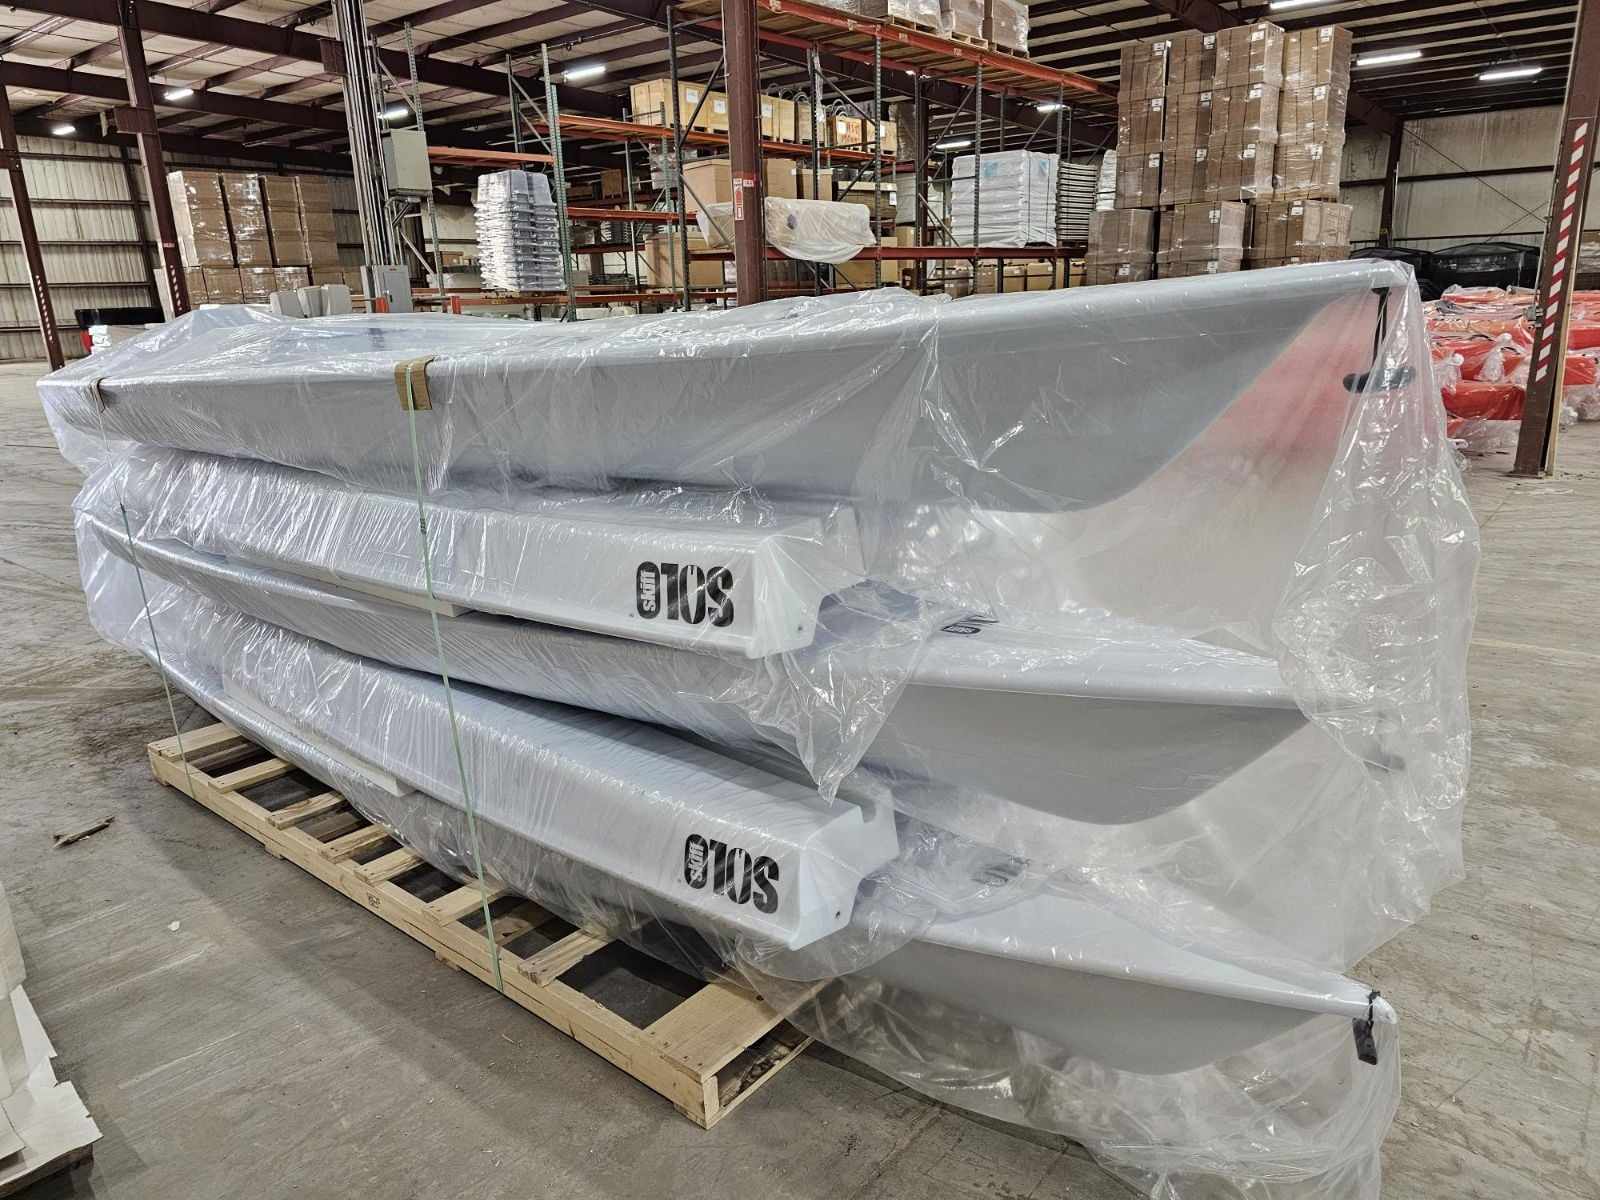 Solo Skiffs ready to ship on pallet